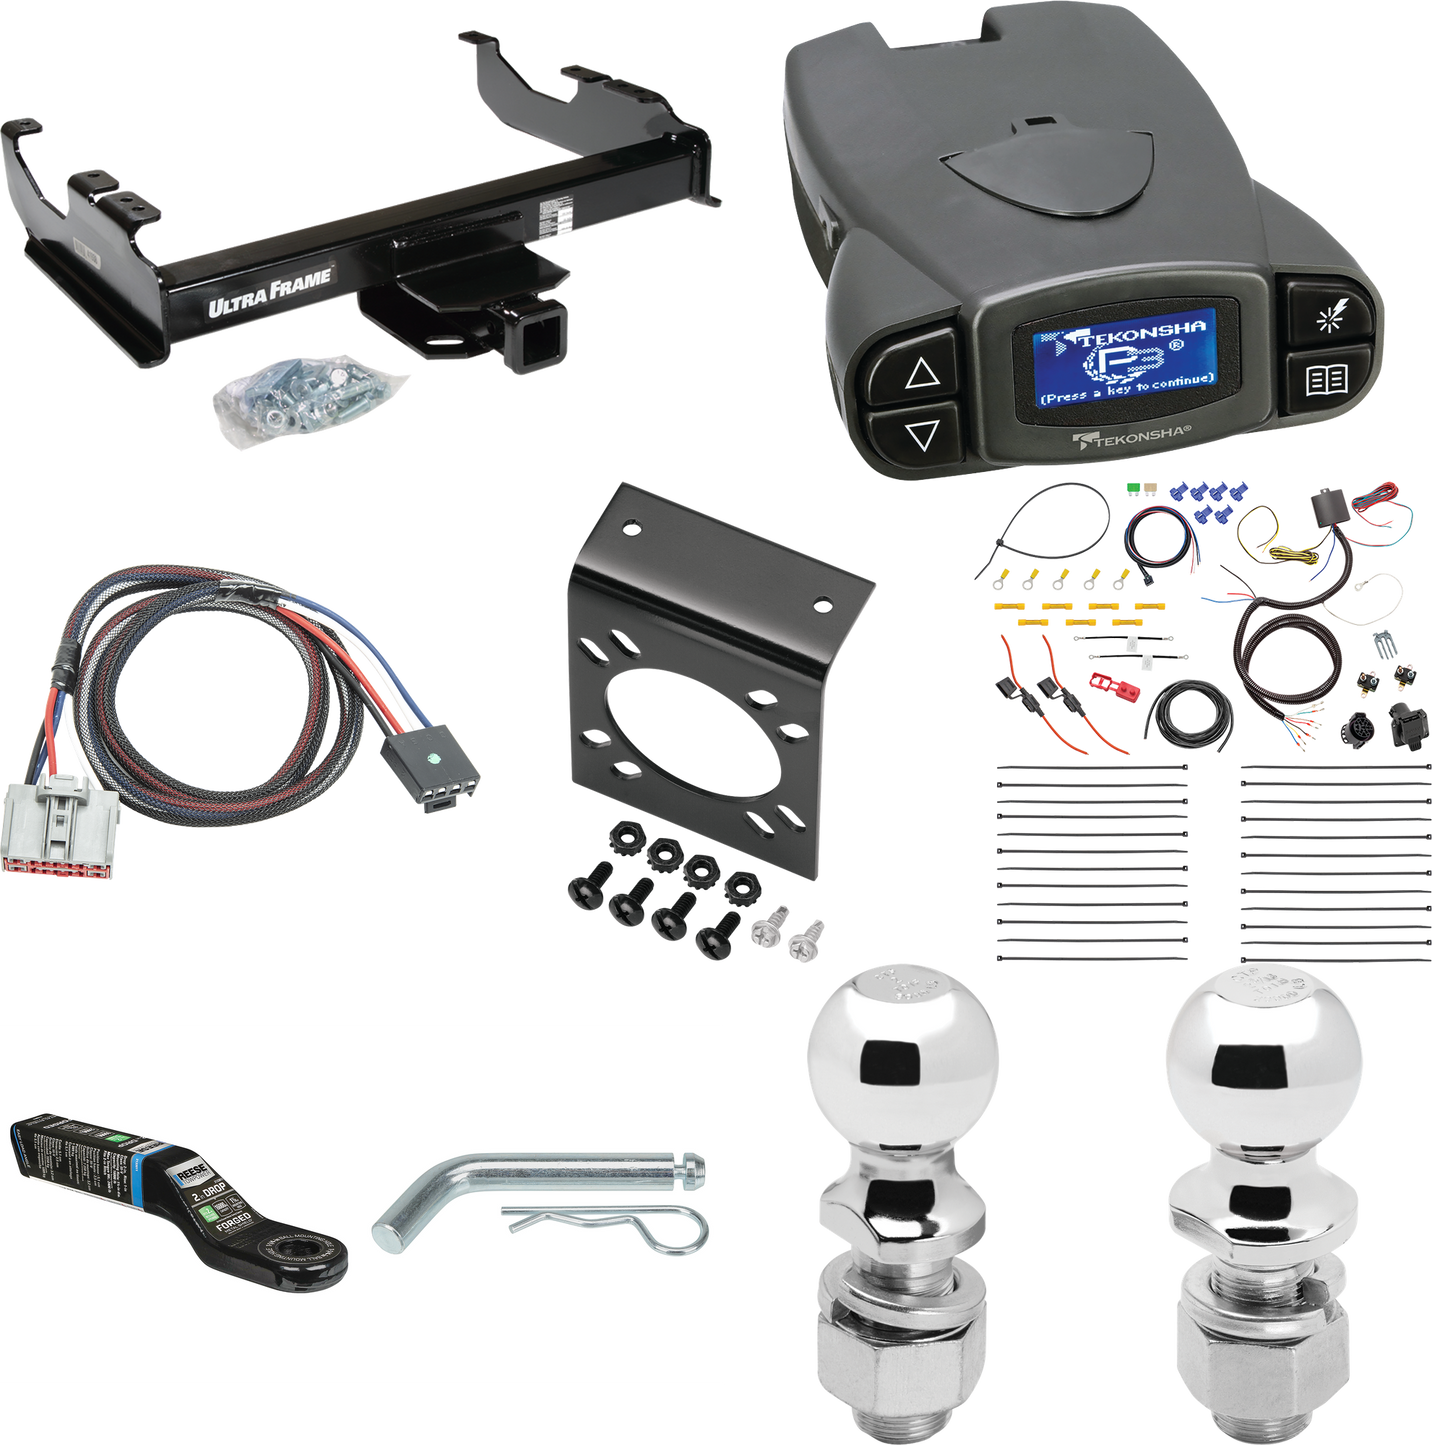 Fits 2020-2023 Chevrolet Silverado 3500 HD Trailer Hitch Tow PKG w/ Tekonsha Prodigy P3 Brake Control + Plug & Play BC Adapter + 7-Way RV Wiring + 2" & 2-5/16" Ball & Drop Mount (For Cab & Chassis, w/34" Wide Frames Models) By Draw-Tite